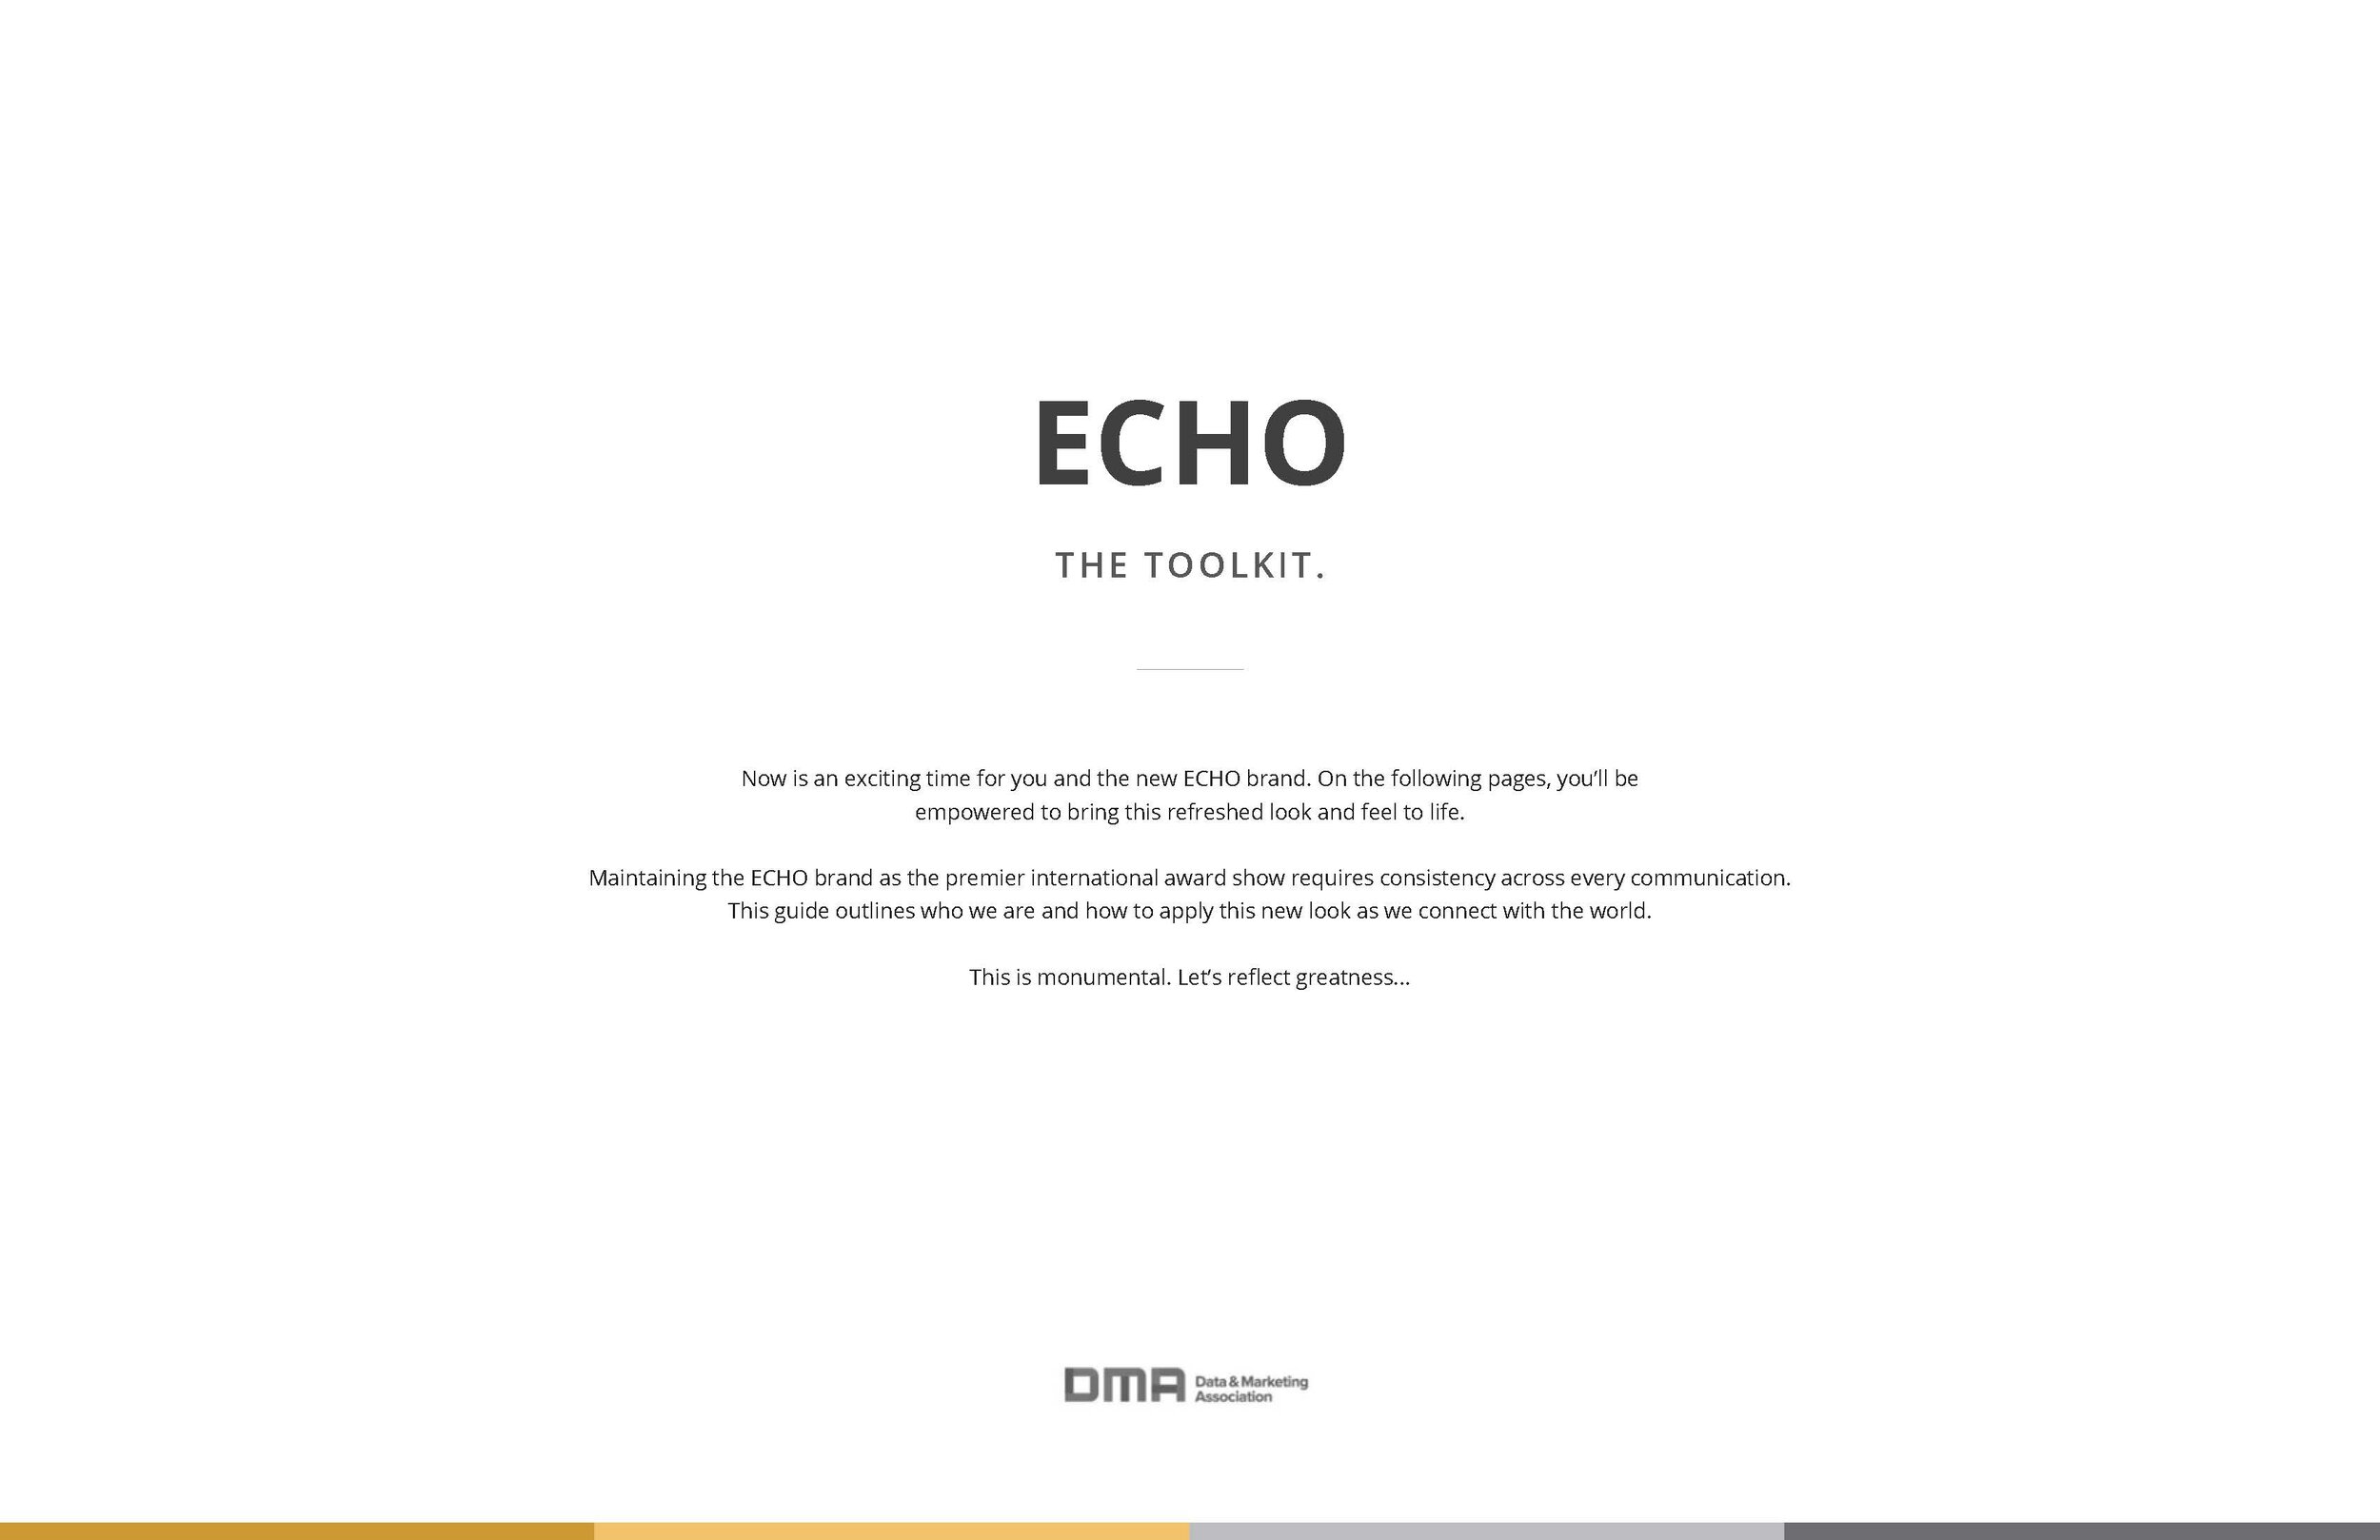 Echo_Toolkit_4.04.18_Page_02.jpg